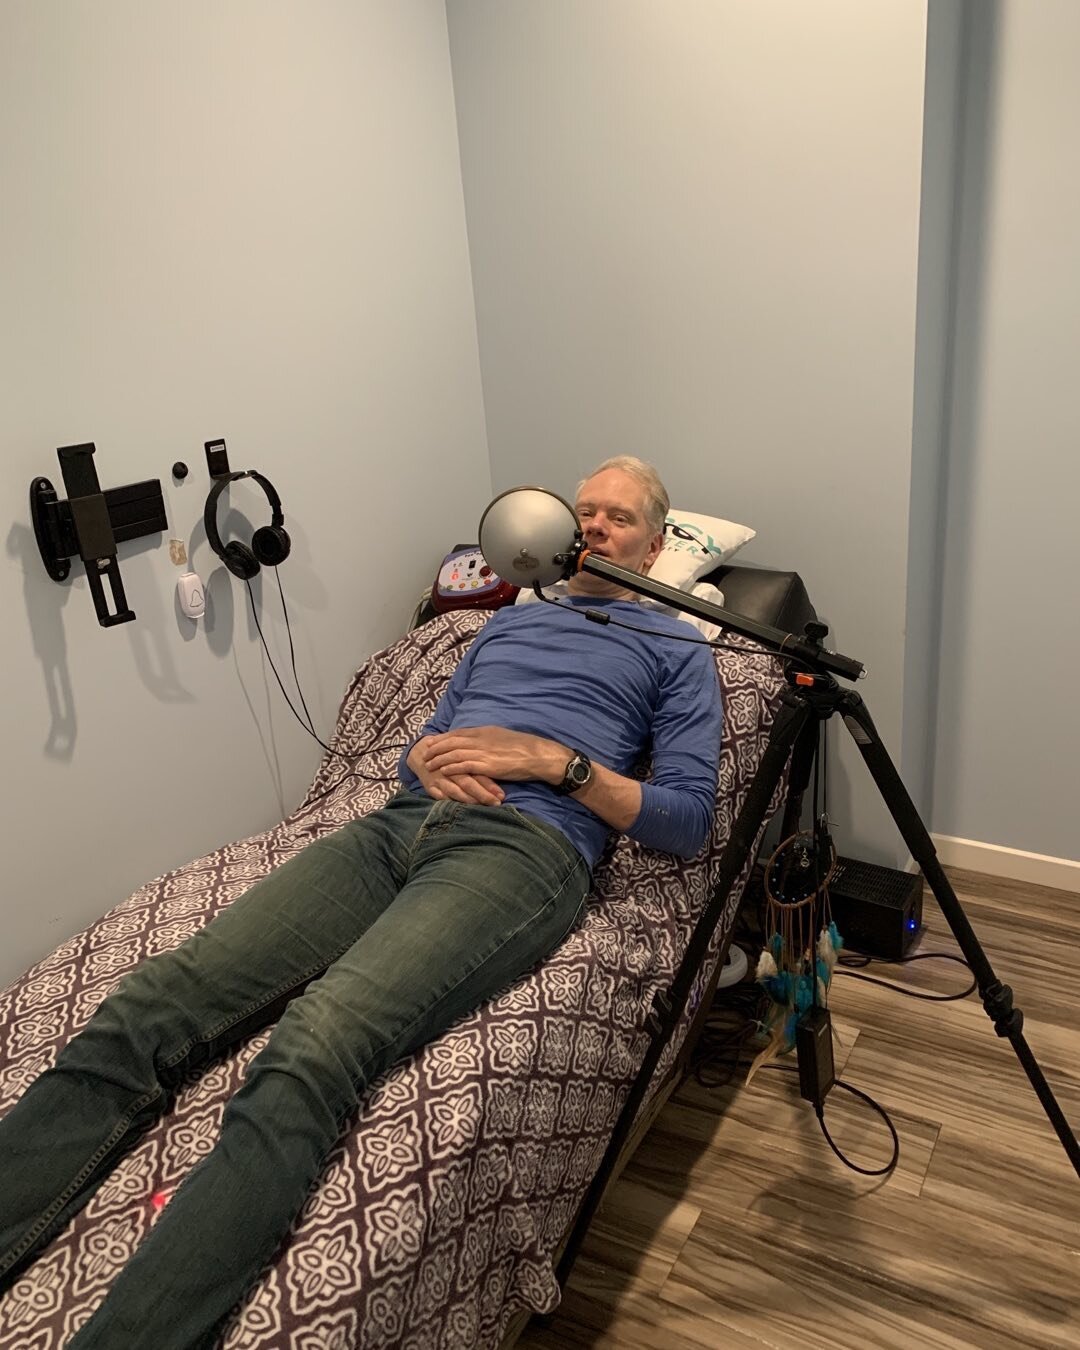 Setting the stage: About to get three rejuvenating sessions in one with the RestStation, BioMat, and Lucia Light. The rest station was developed by a military veteran with PTSD and it uses vibration and sound to reset the central nervous system. Biom